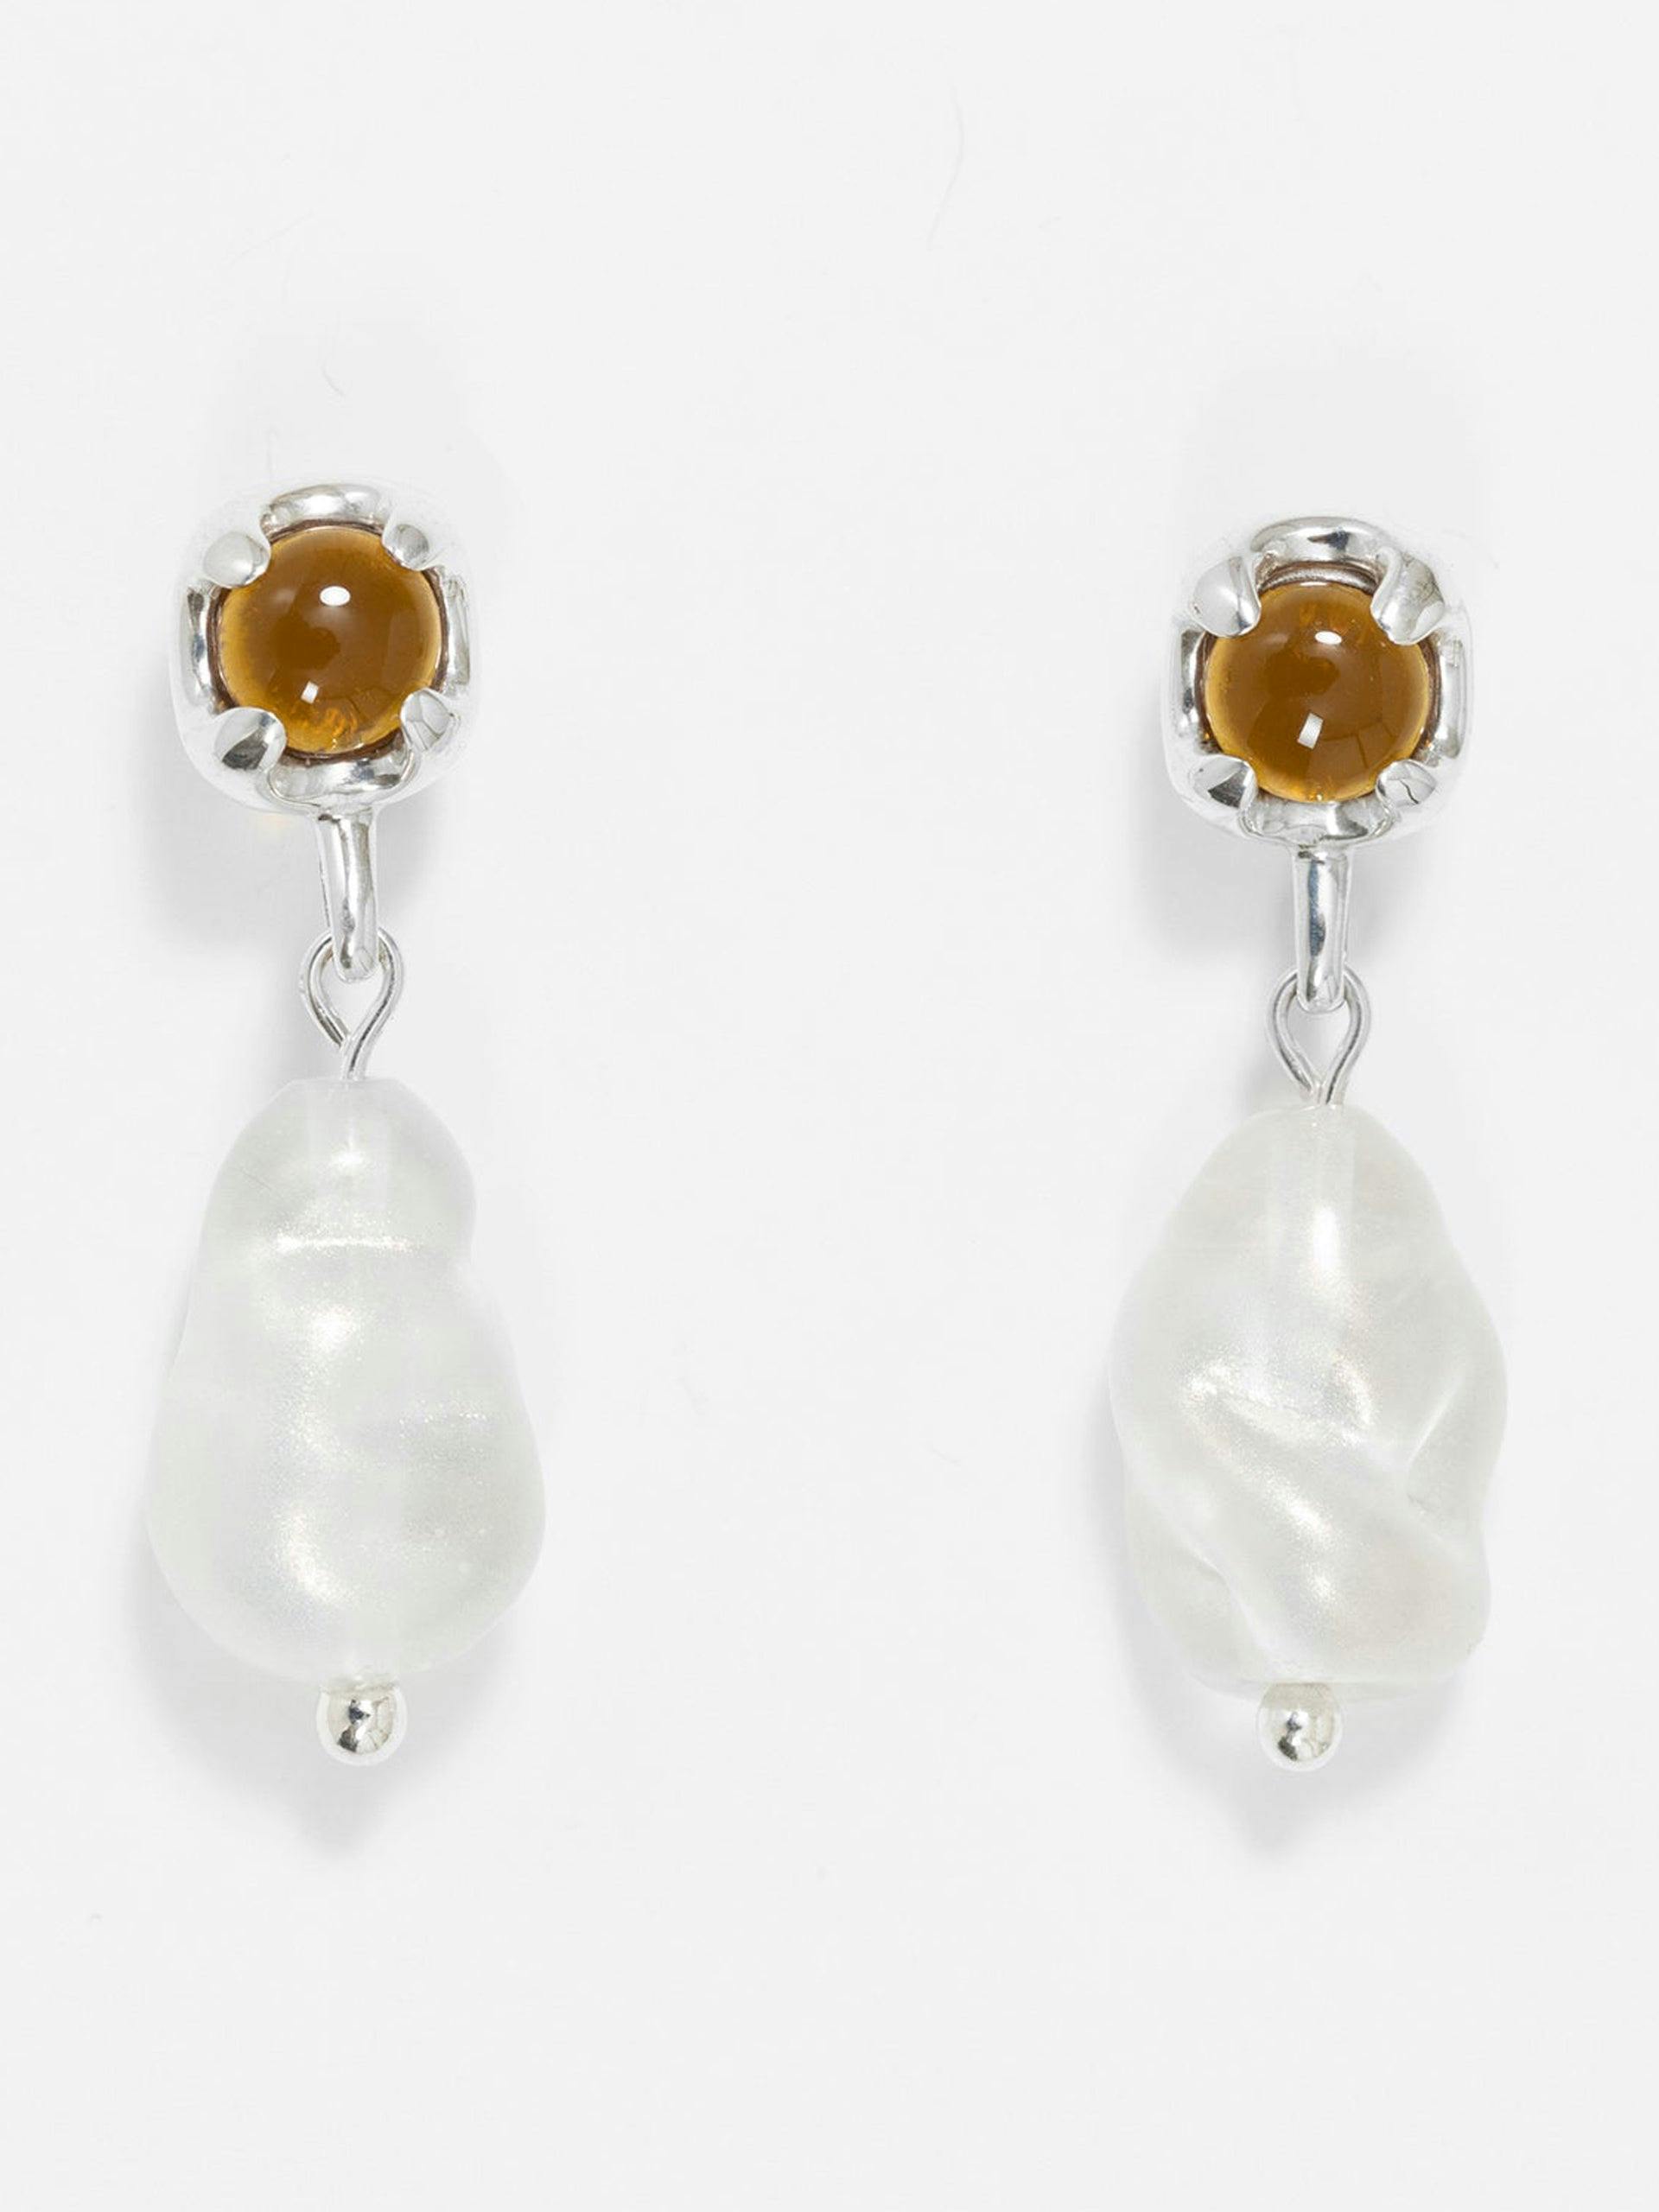 Pearl earrings with amber detail